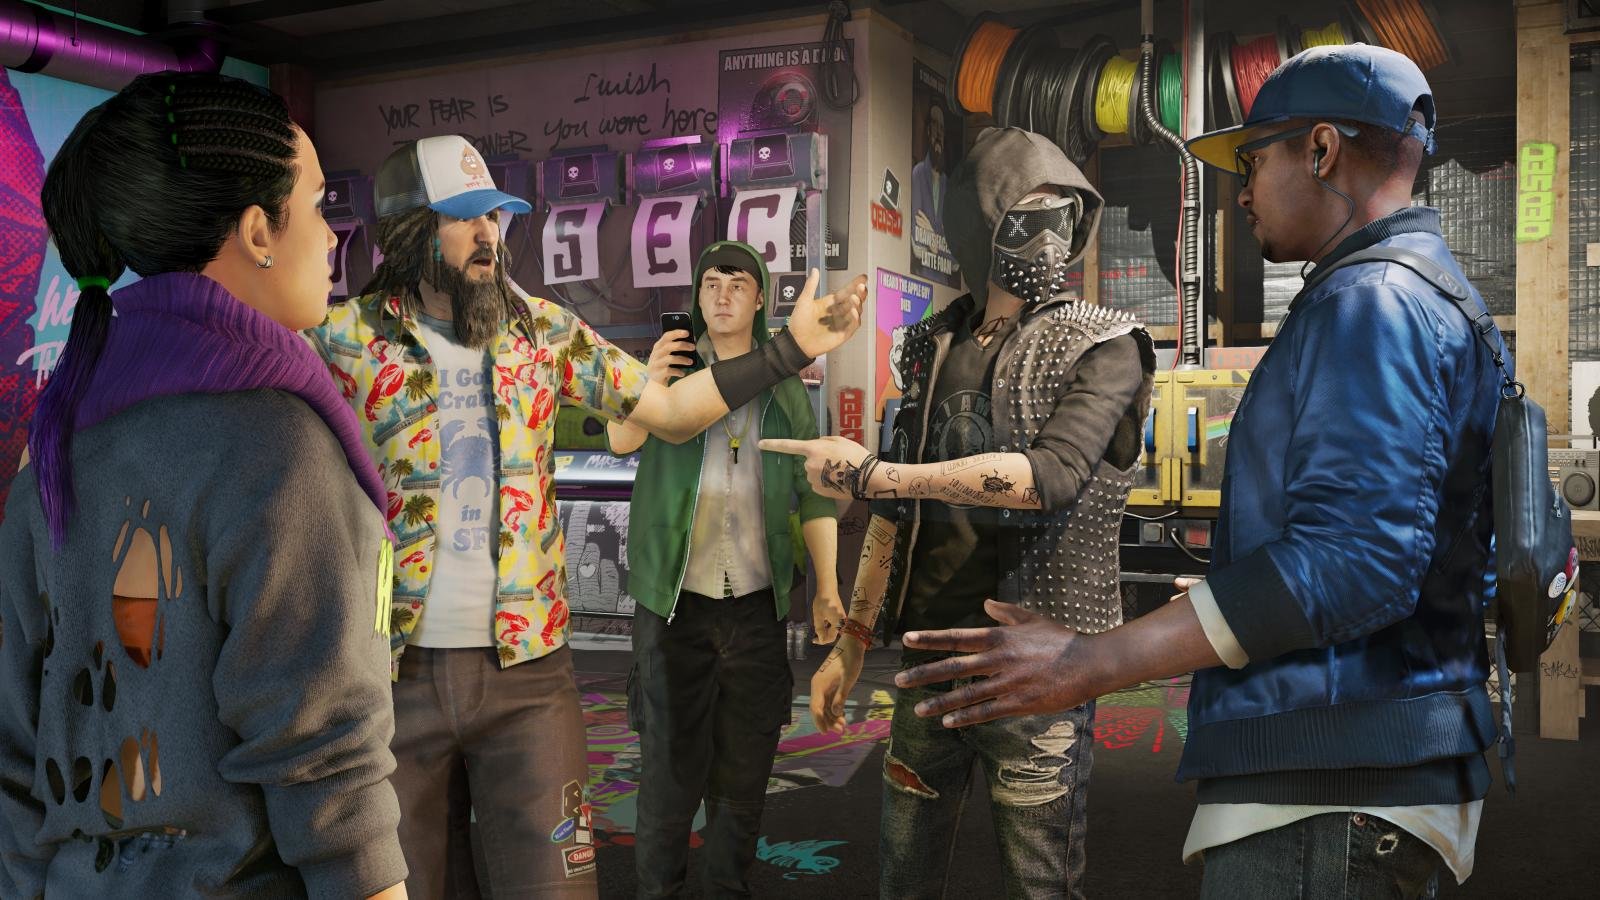 Free Watch Dogs 2 high quality wallpaper ID:366064 for hd 1600x900 desktop